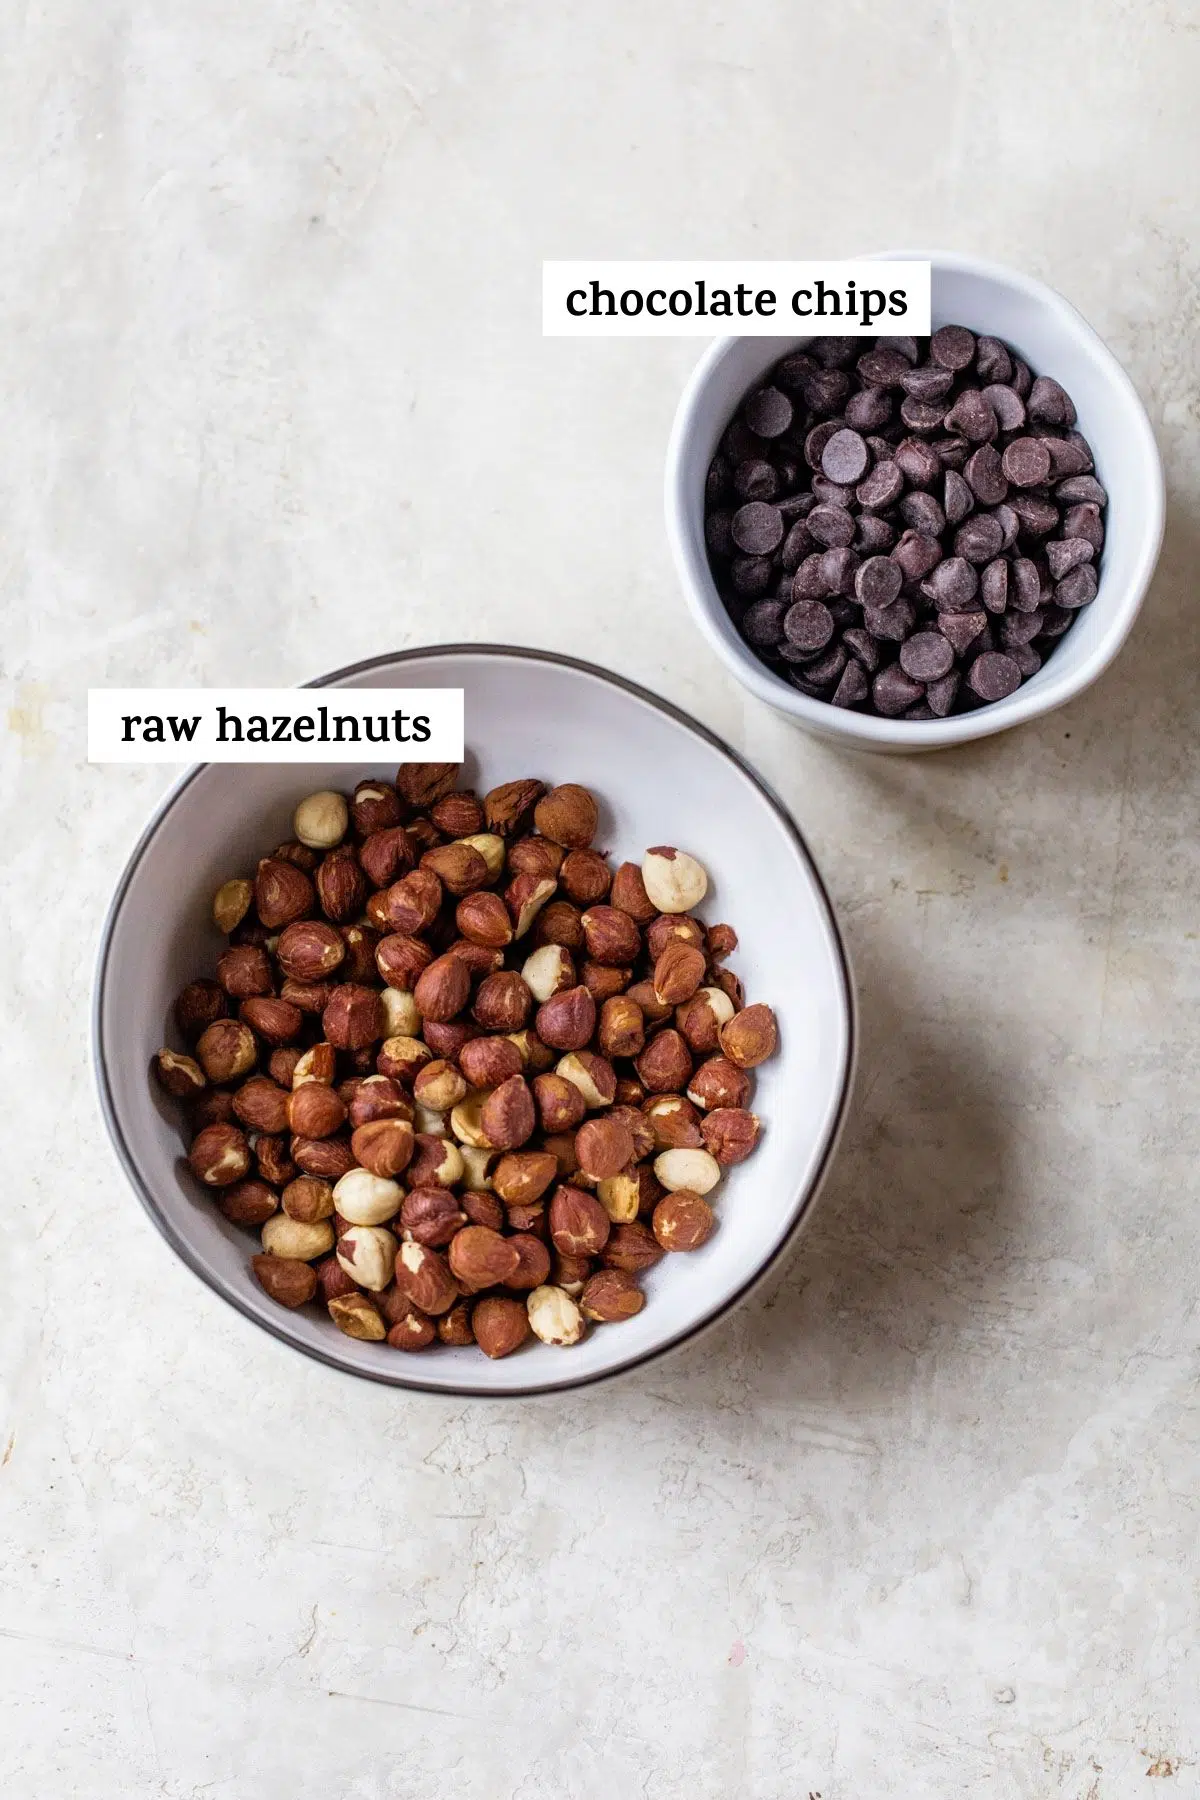 hazelnuts in a bowl and chocolate chips in a separate bowl